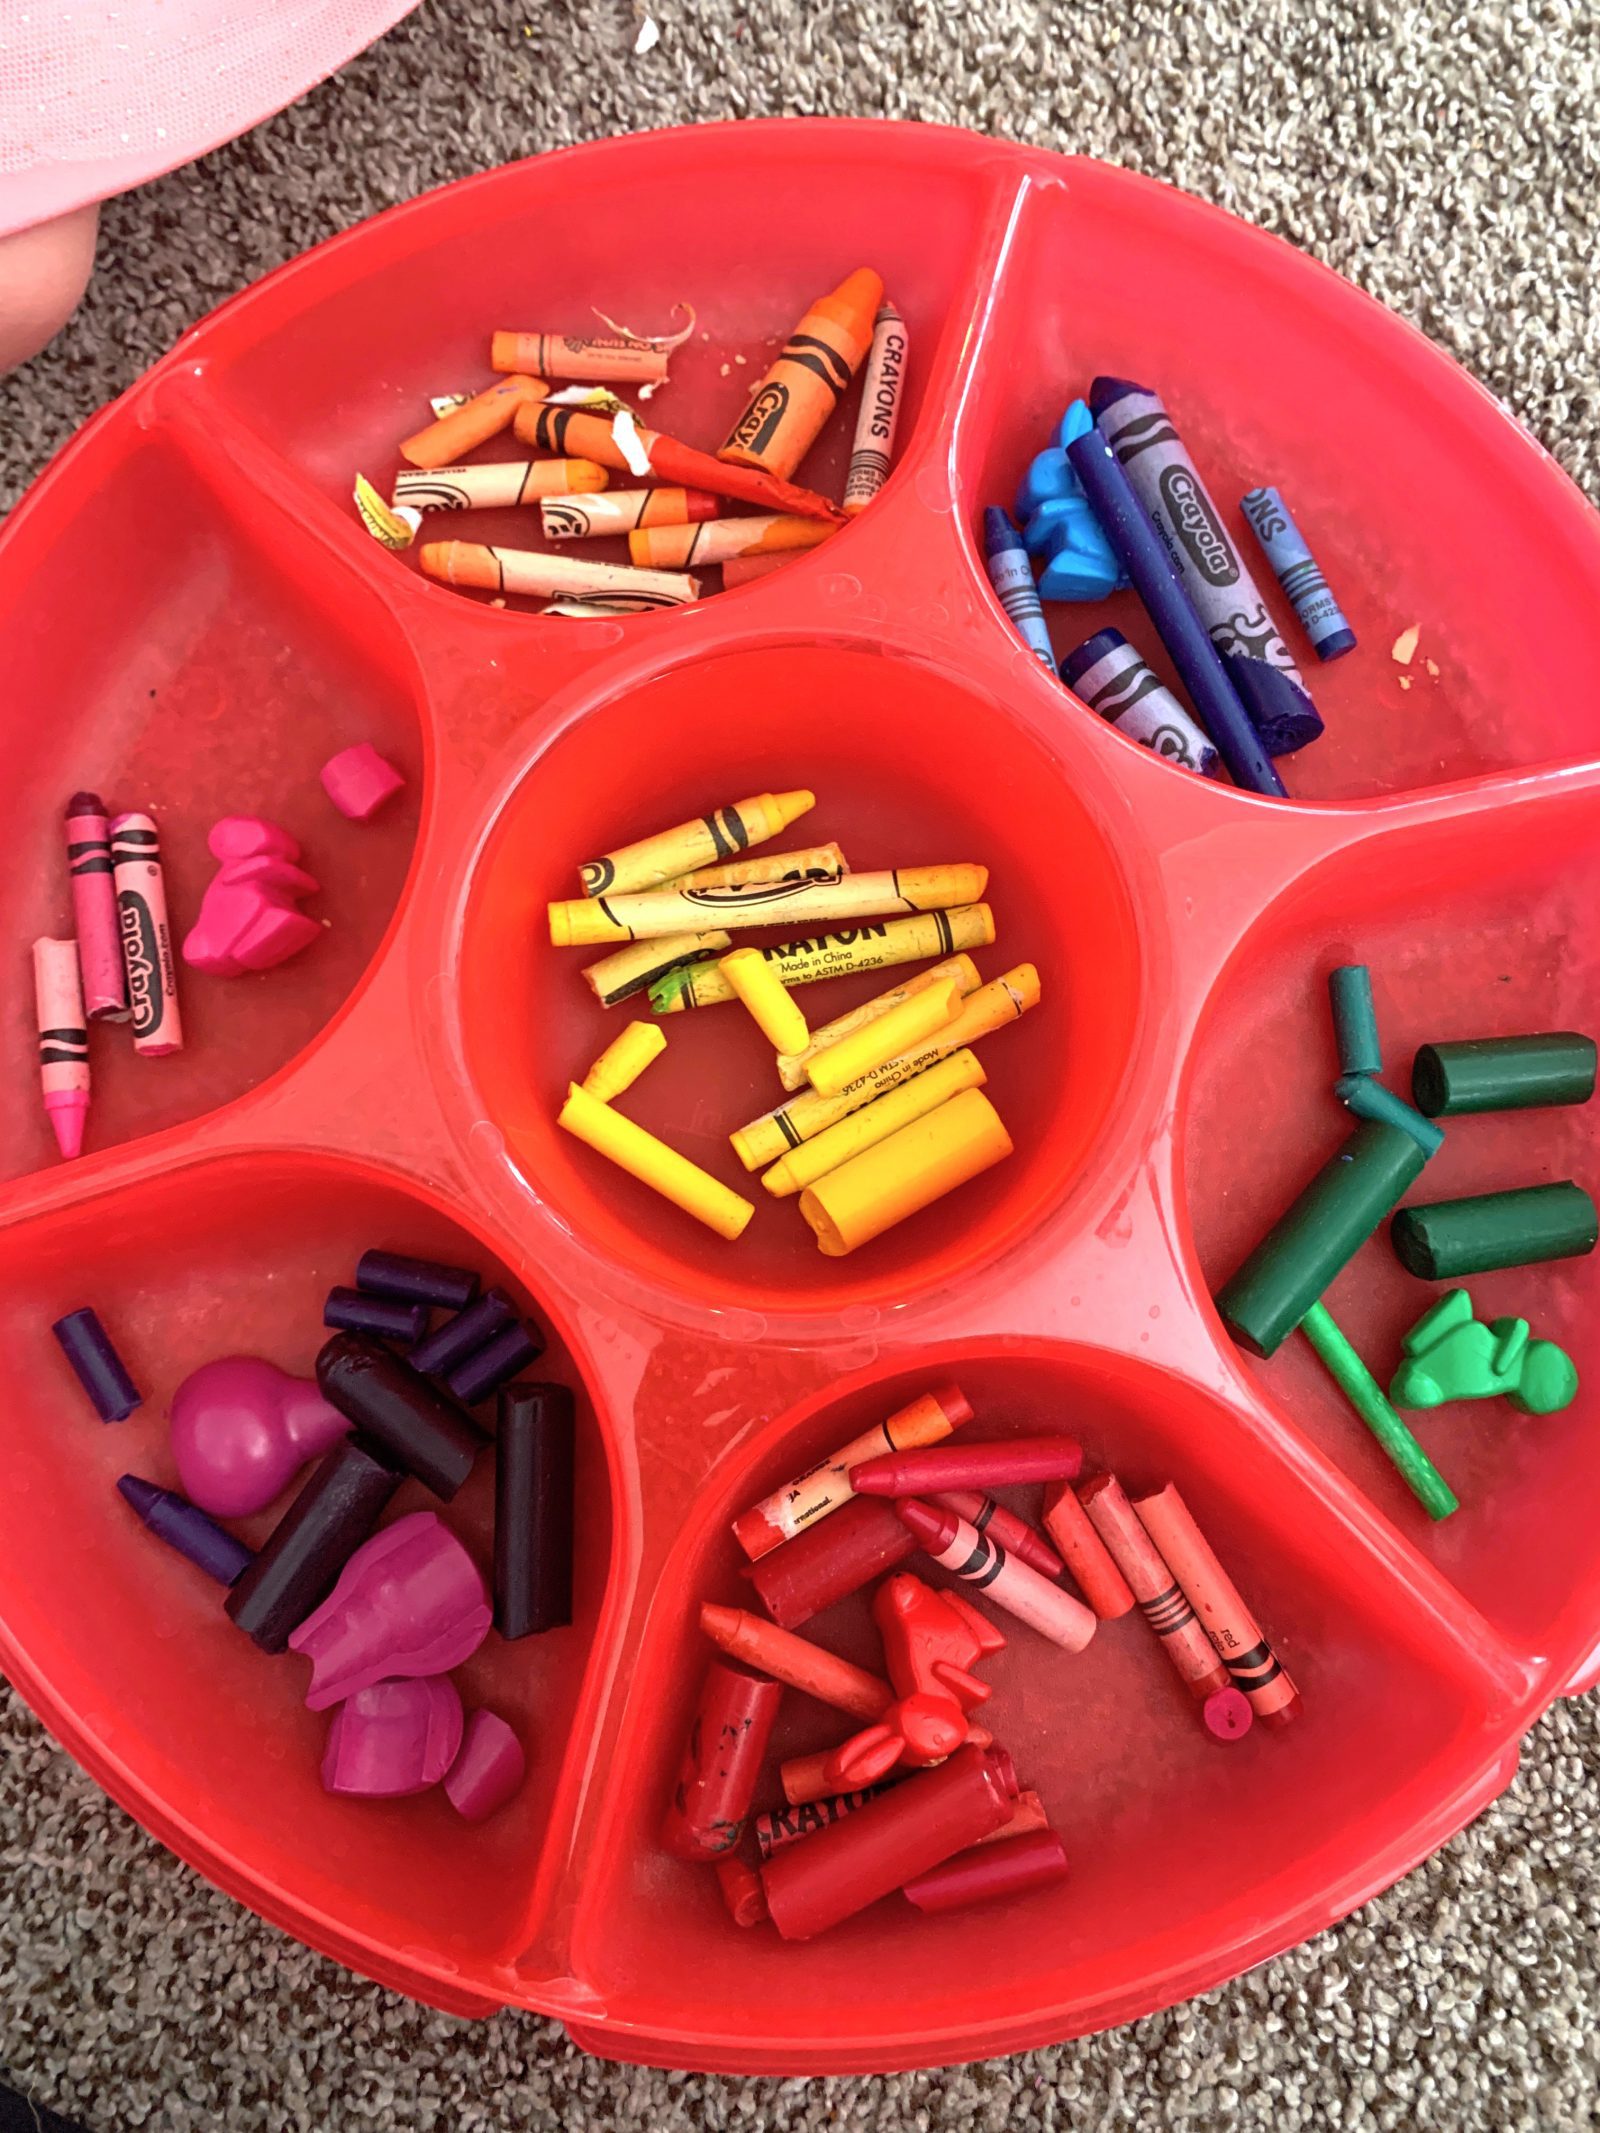 How To Melt Crayons In Silicone Molds The Easy Way - Crafty Art Ideas